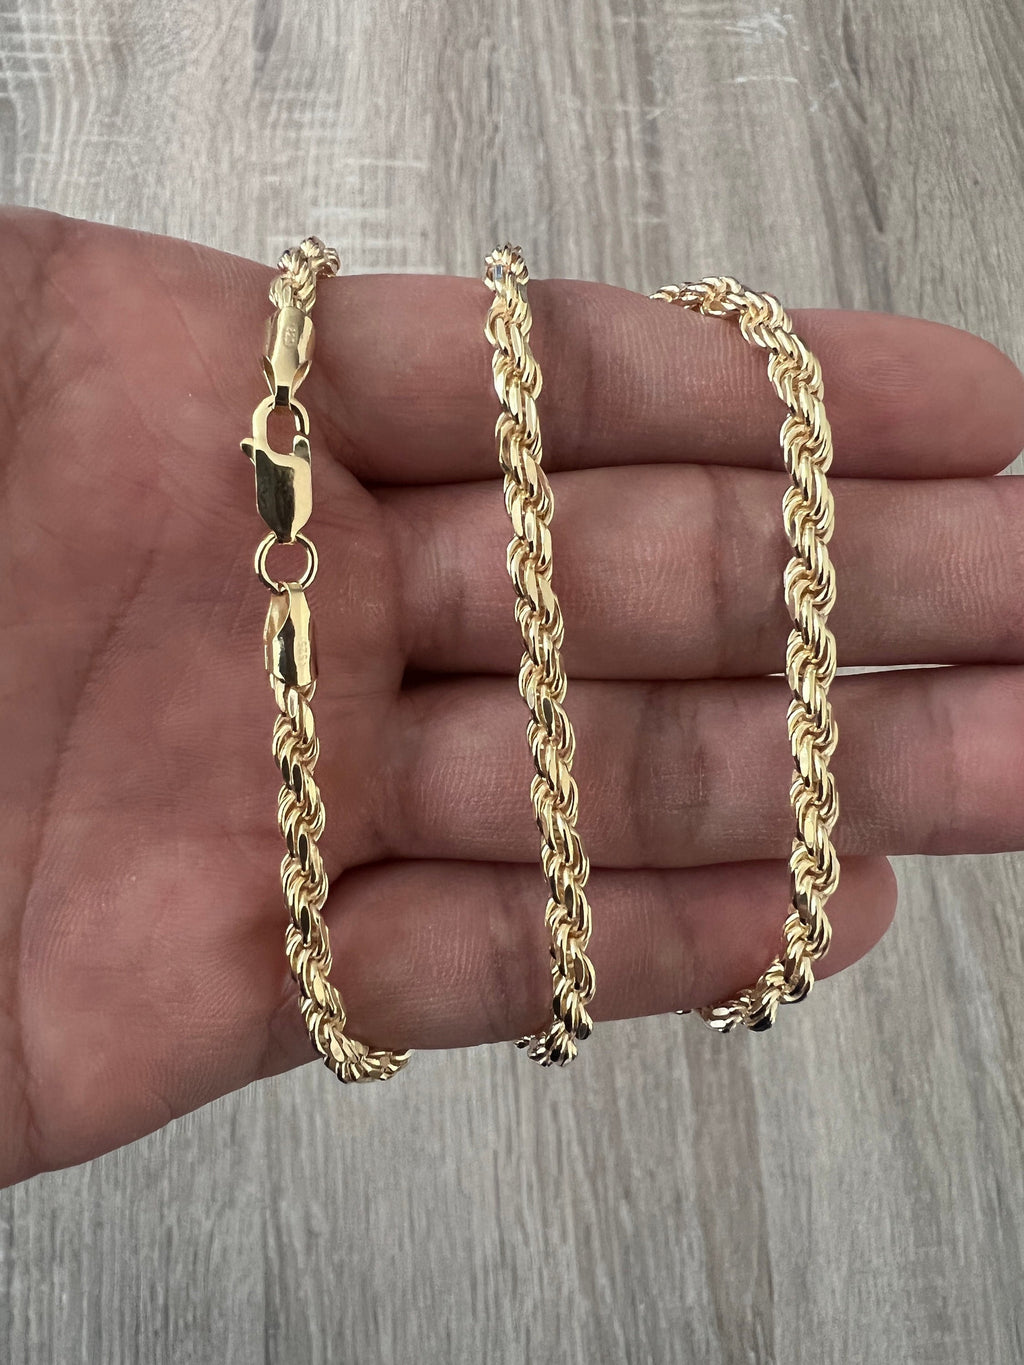 4mm Rope 14K Gold Vermeil Over Solid 925 Sterling Silver Chain